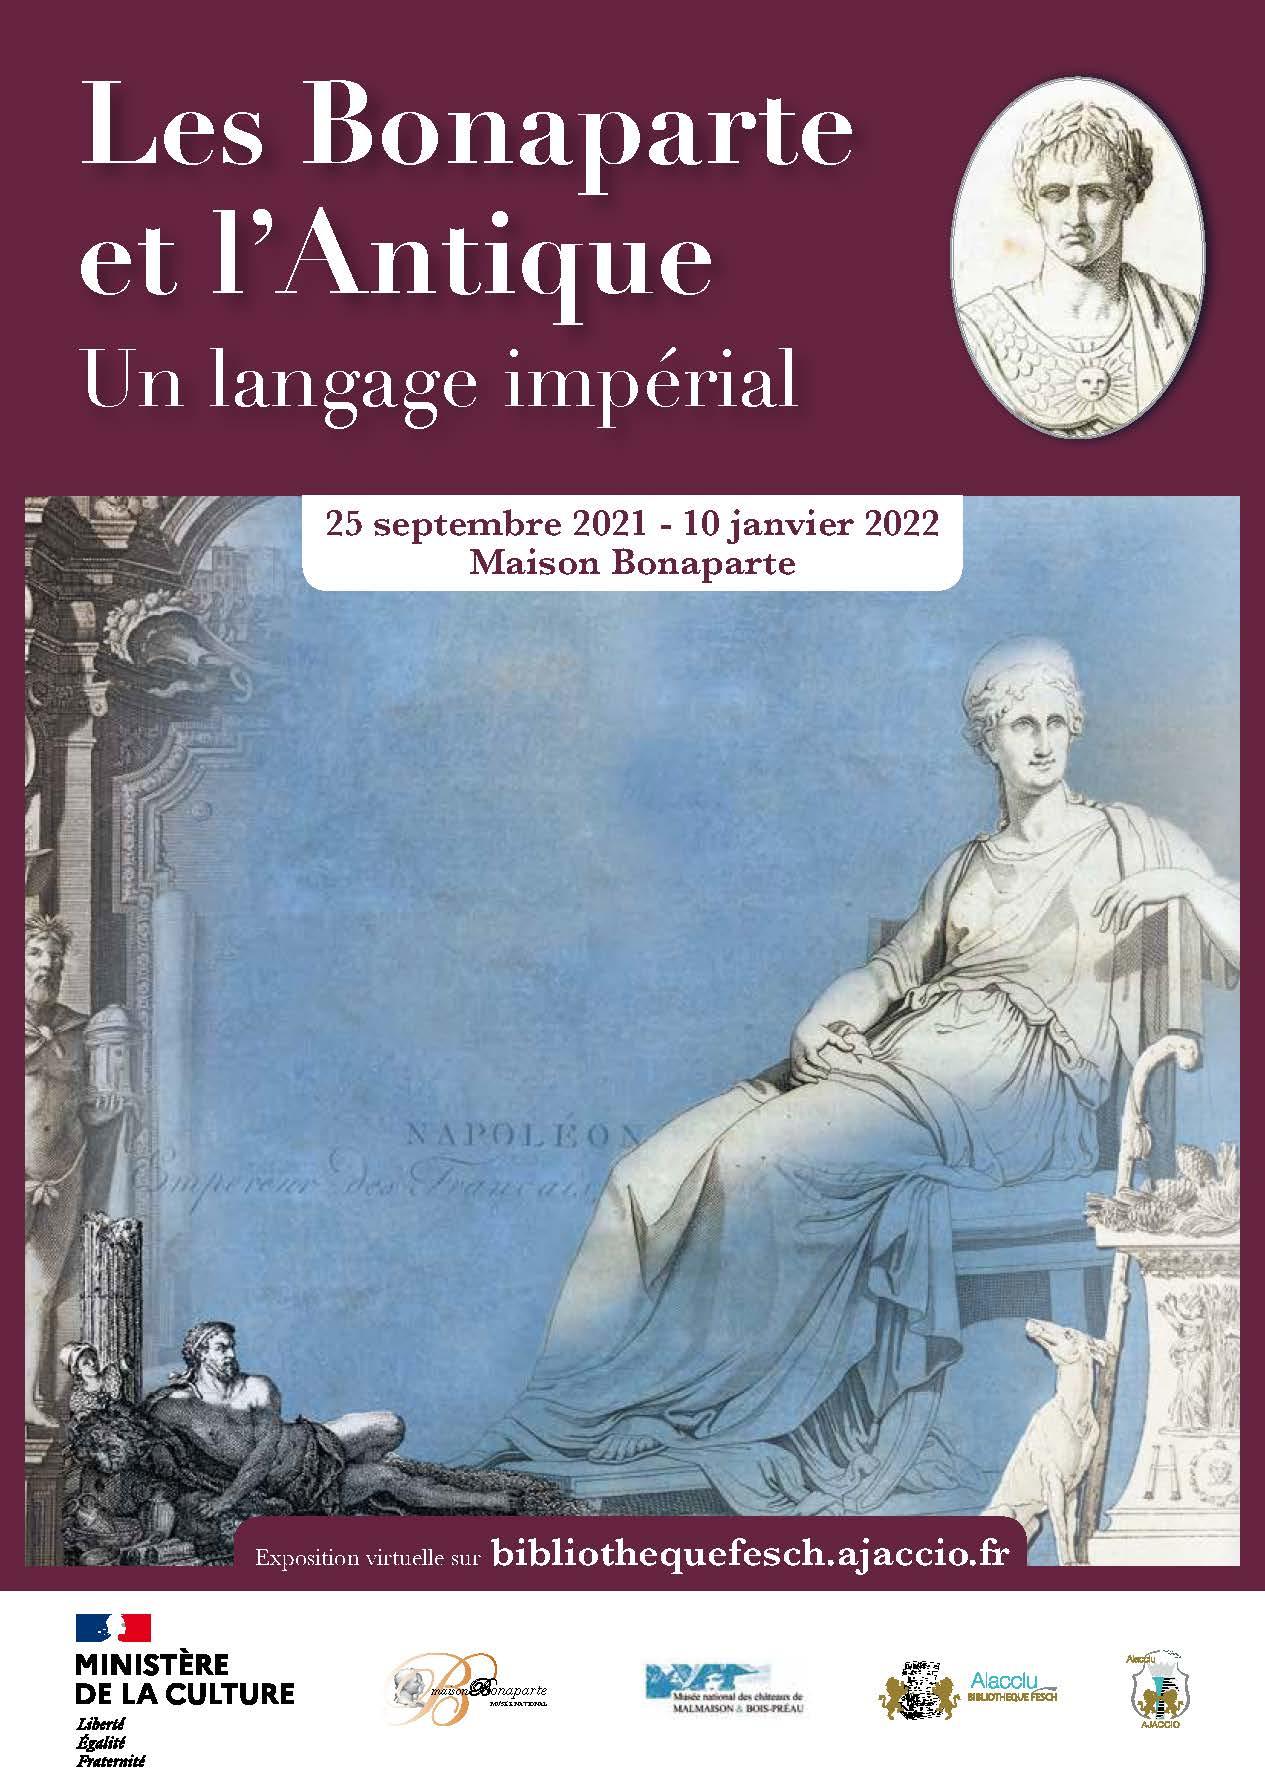 The Bonapartes and the antique, an imperial language | Musée 